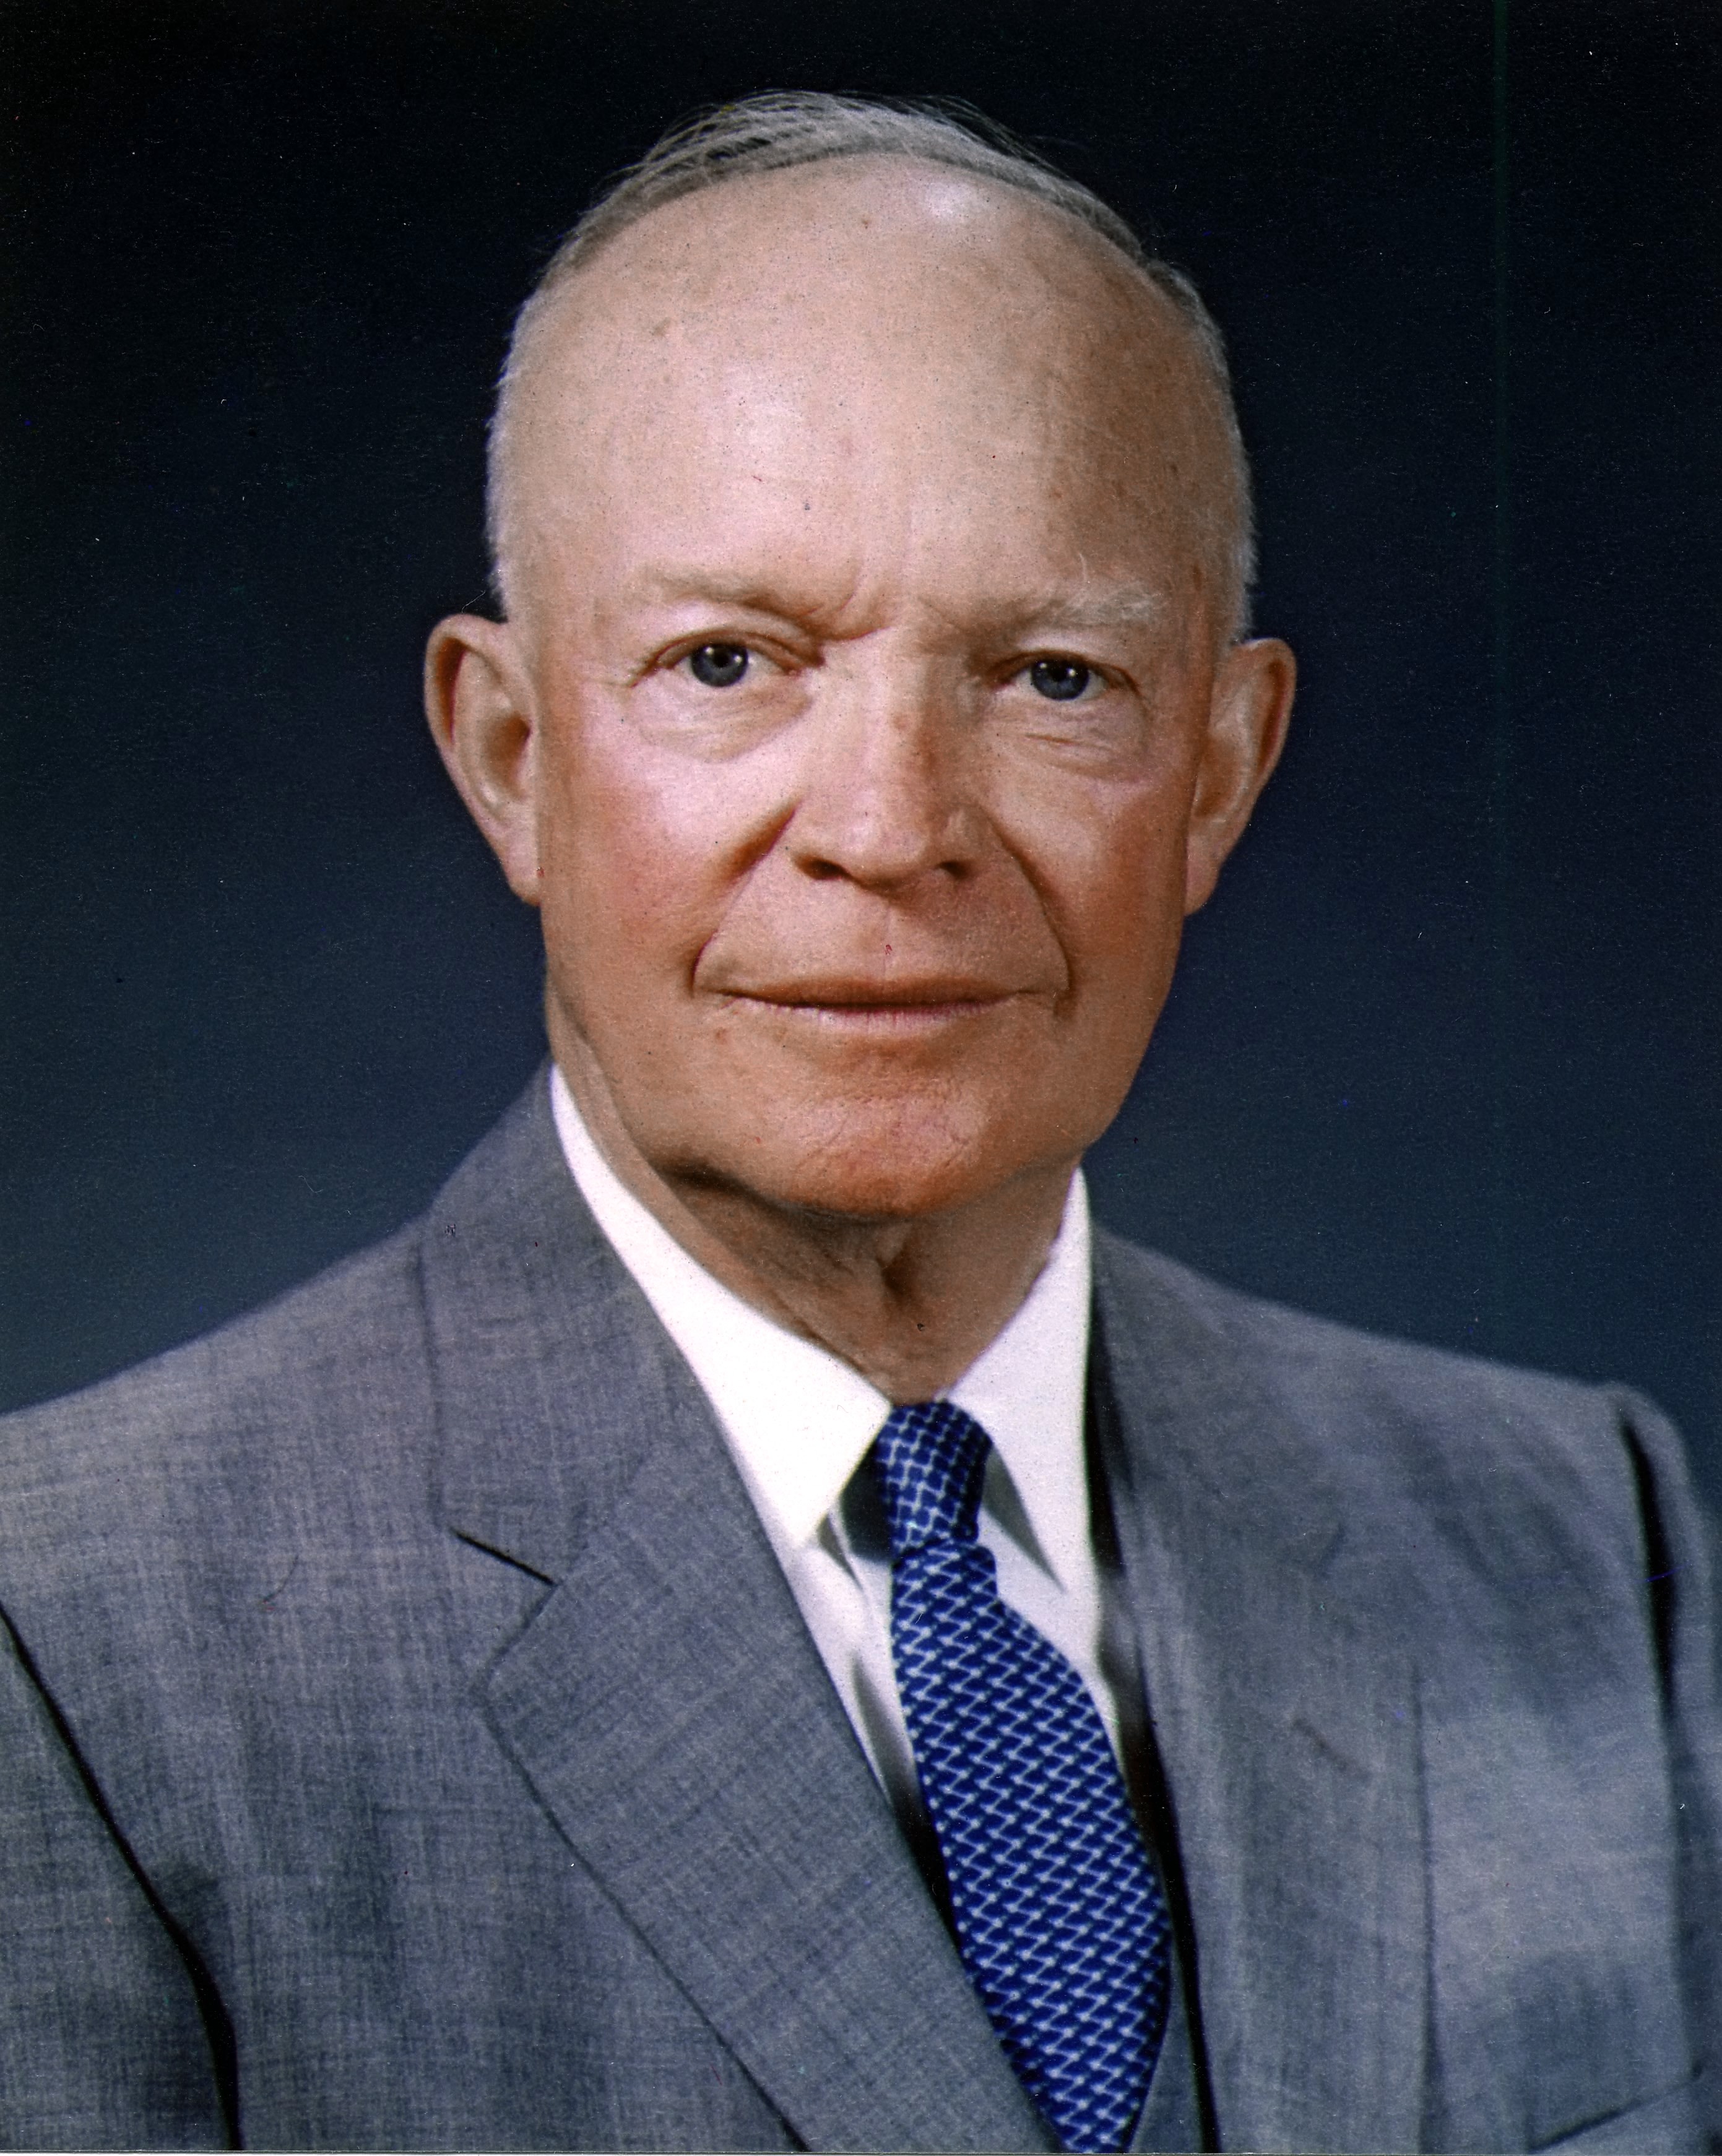 Dwight_D._Eisenhower,_official_photo_portrait,_May_29,_1959